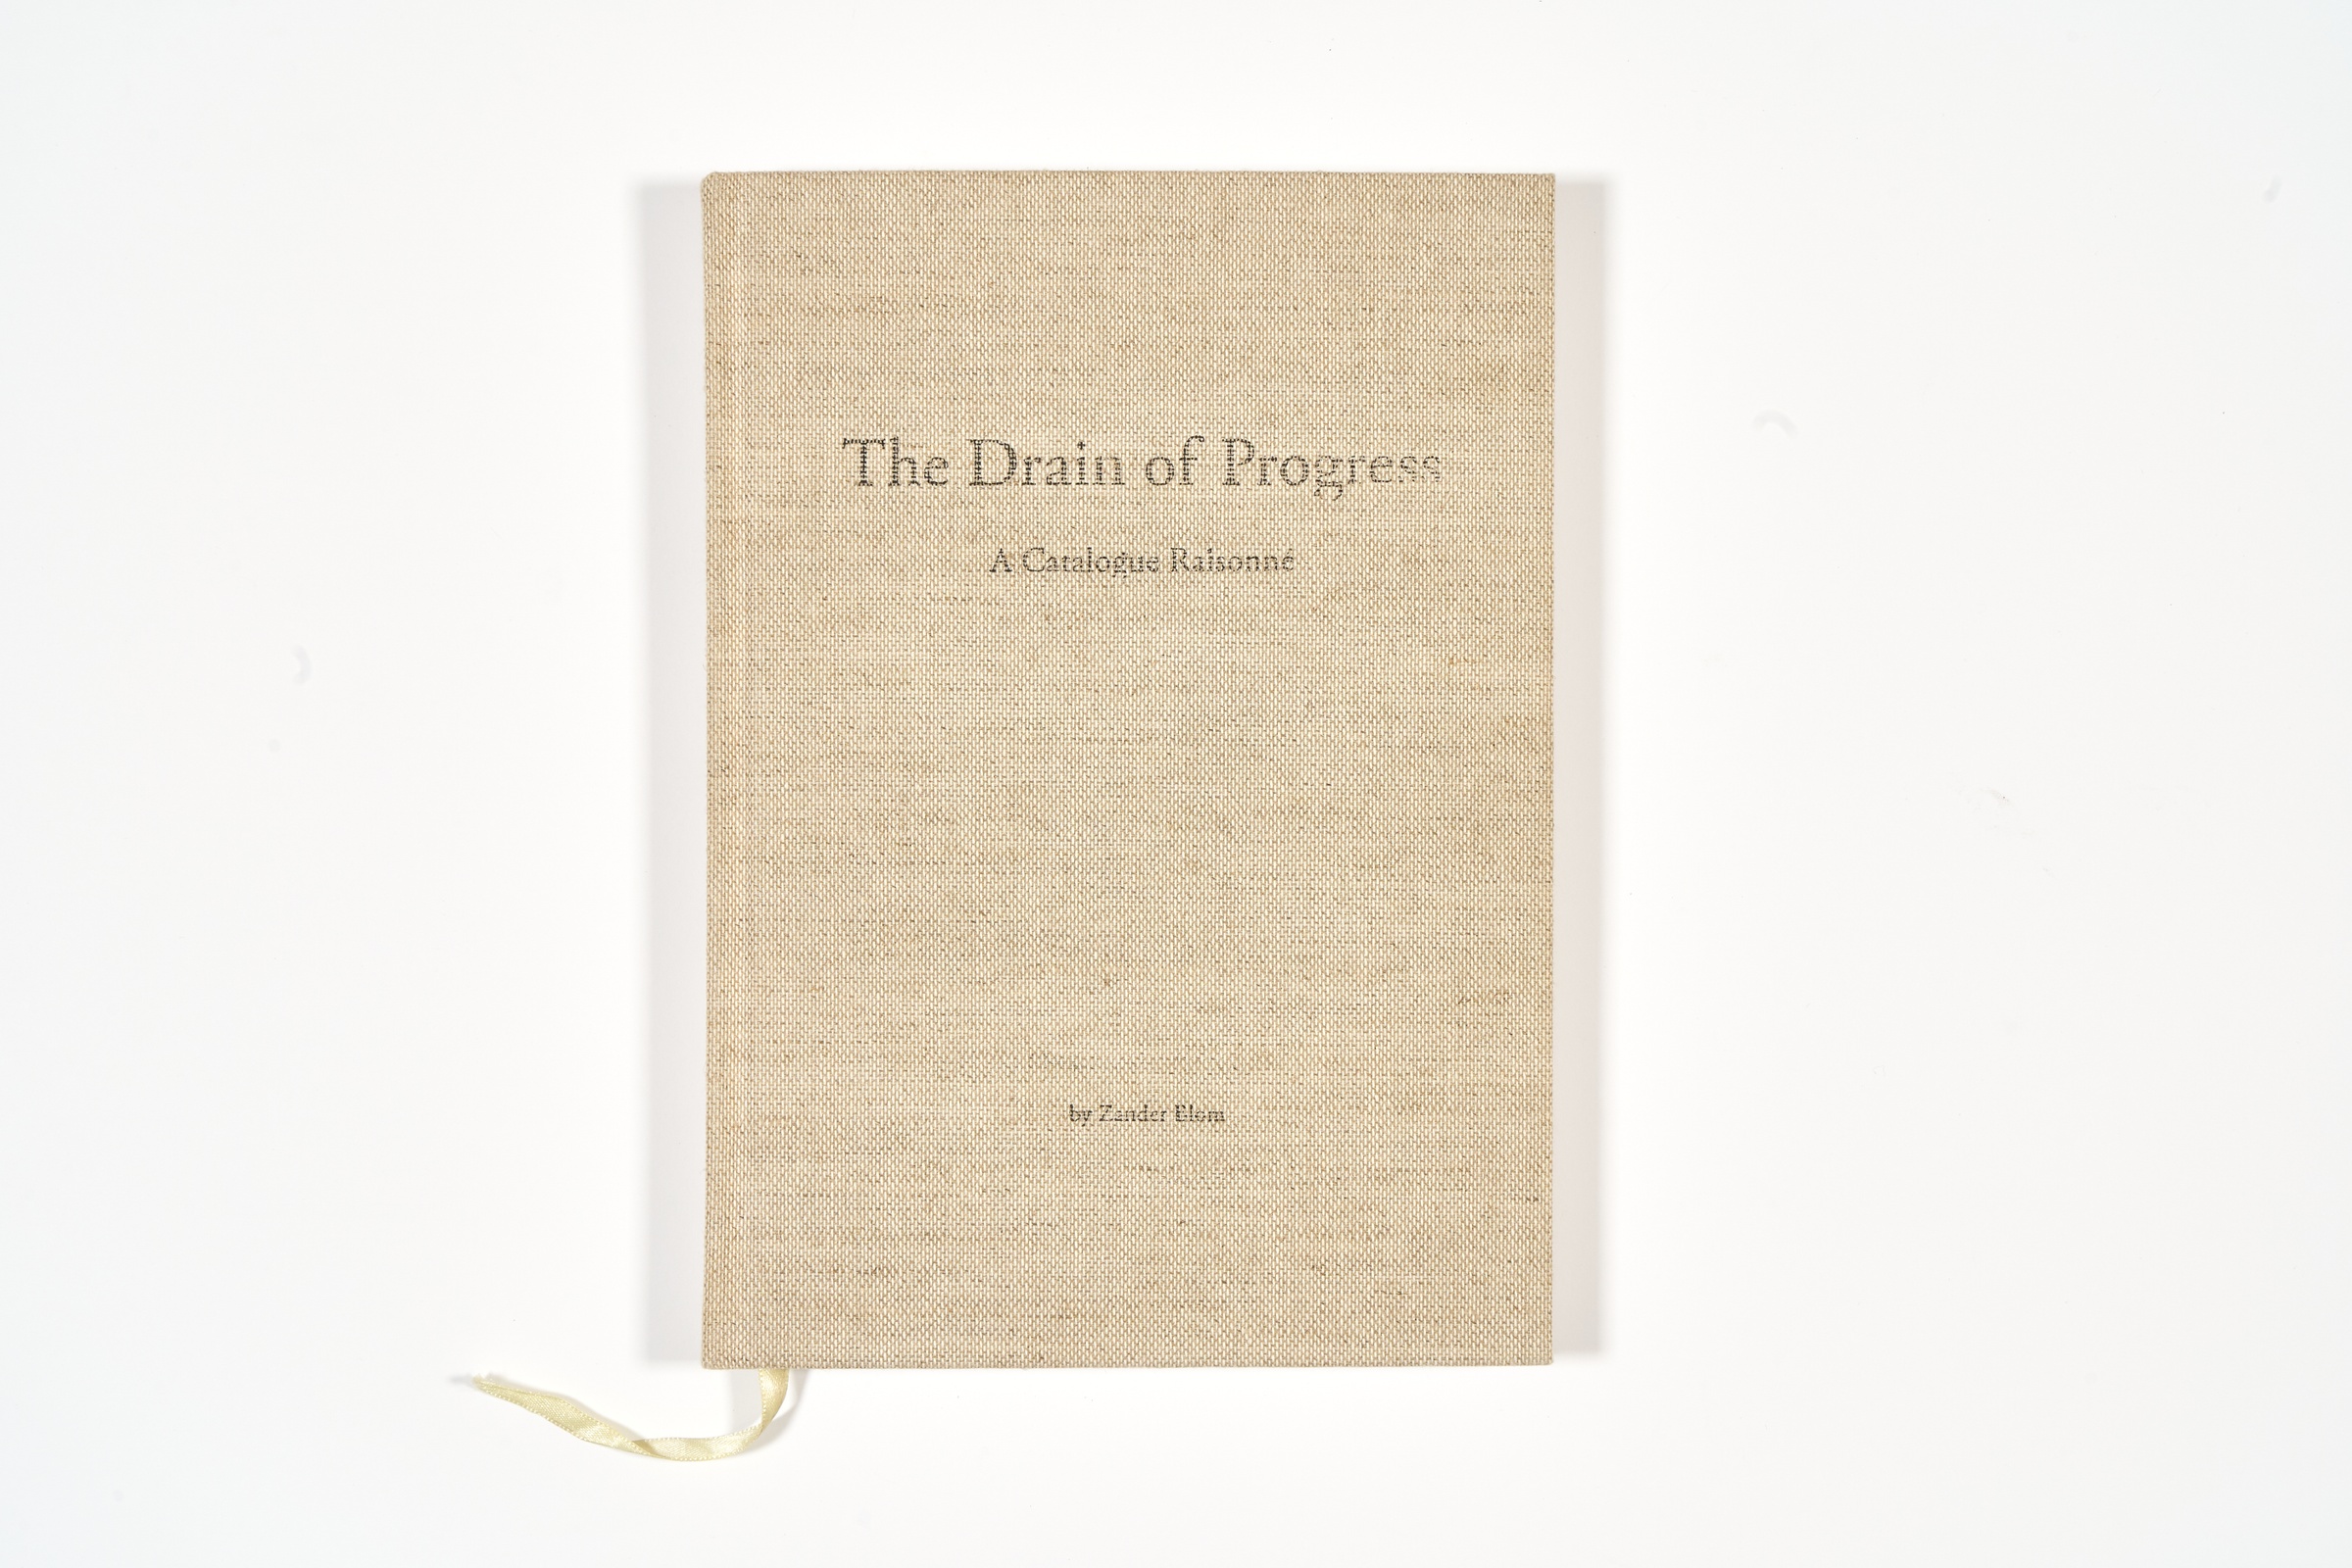 A topdown photograph of the cover of Zander Blom's photo-book 'The Drain of Progress: A Catalogue of Raisonné' on a white background.
